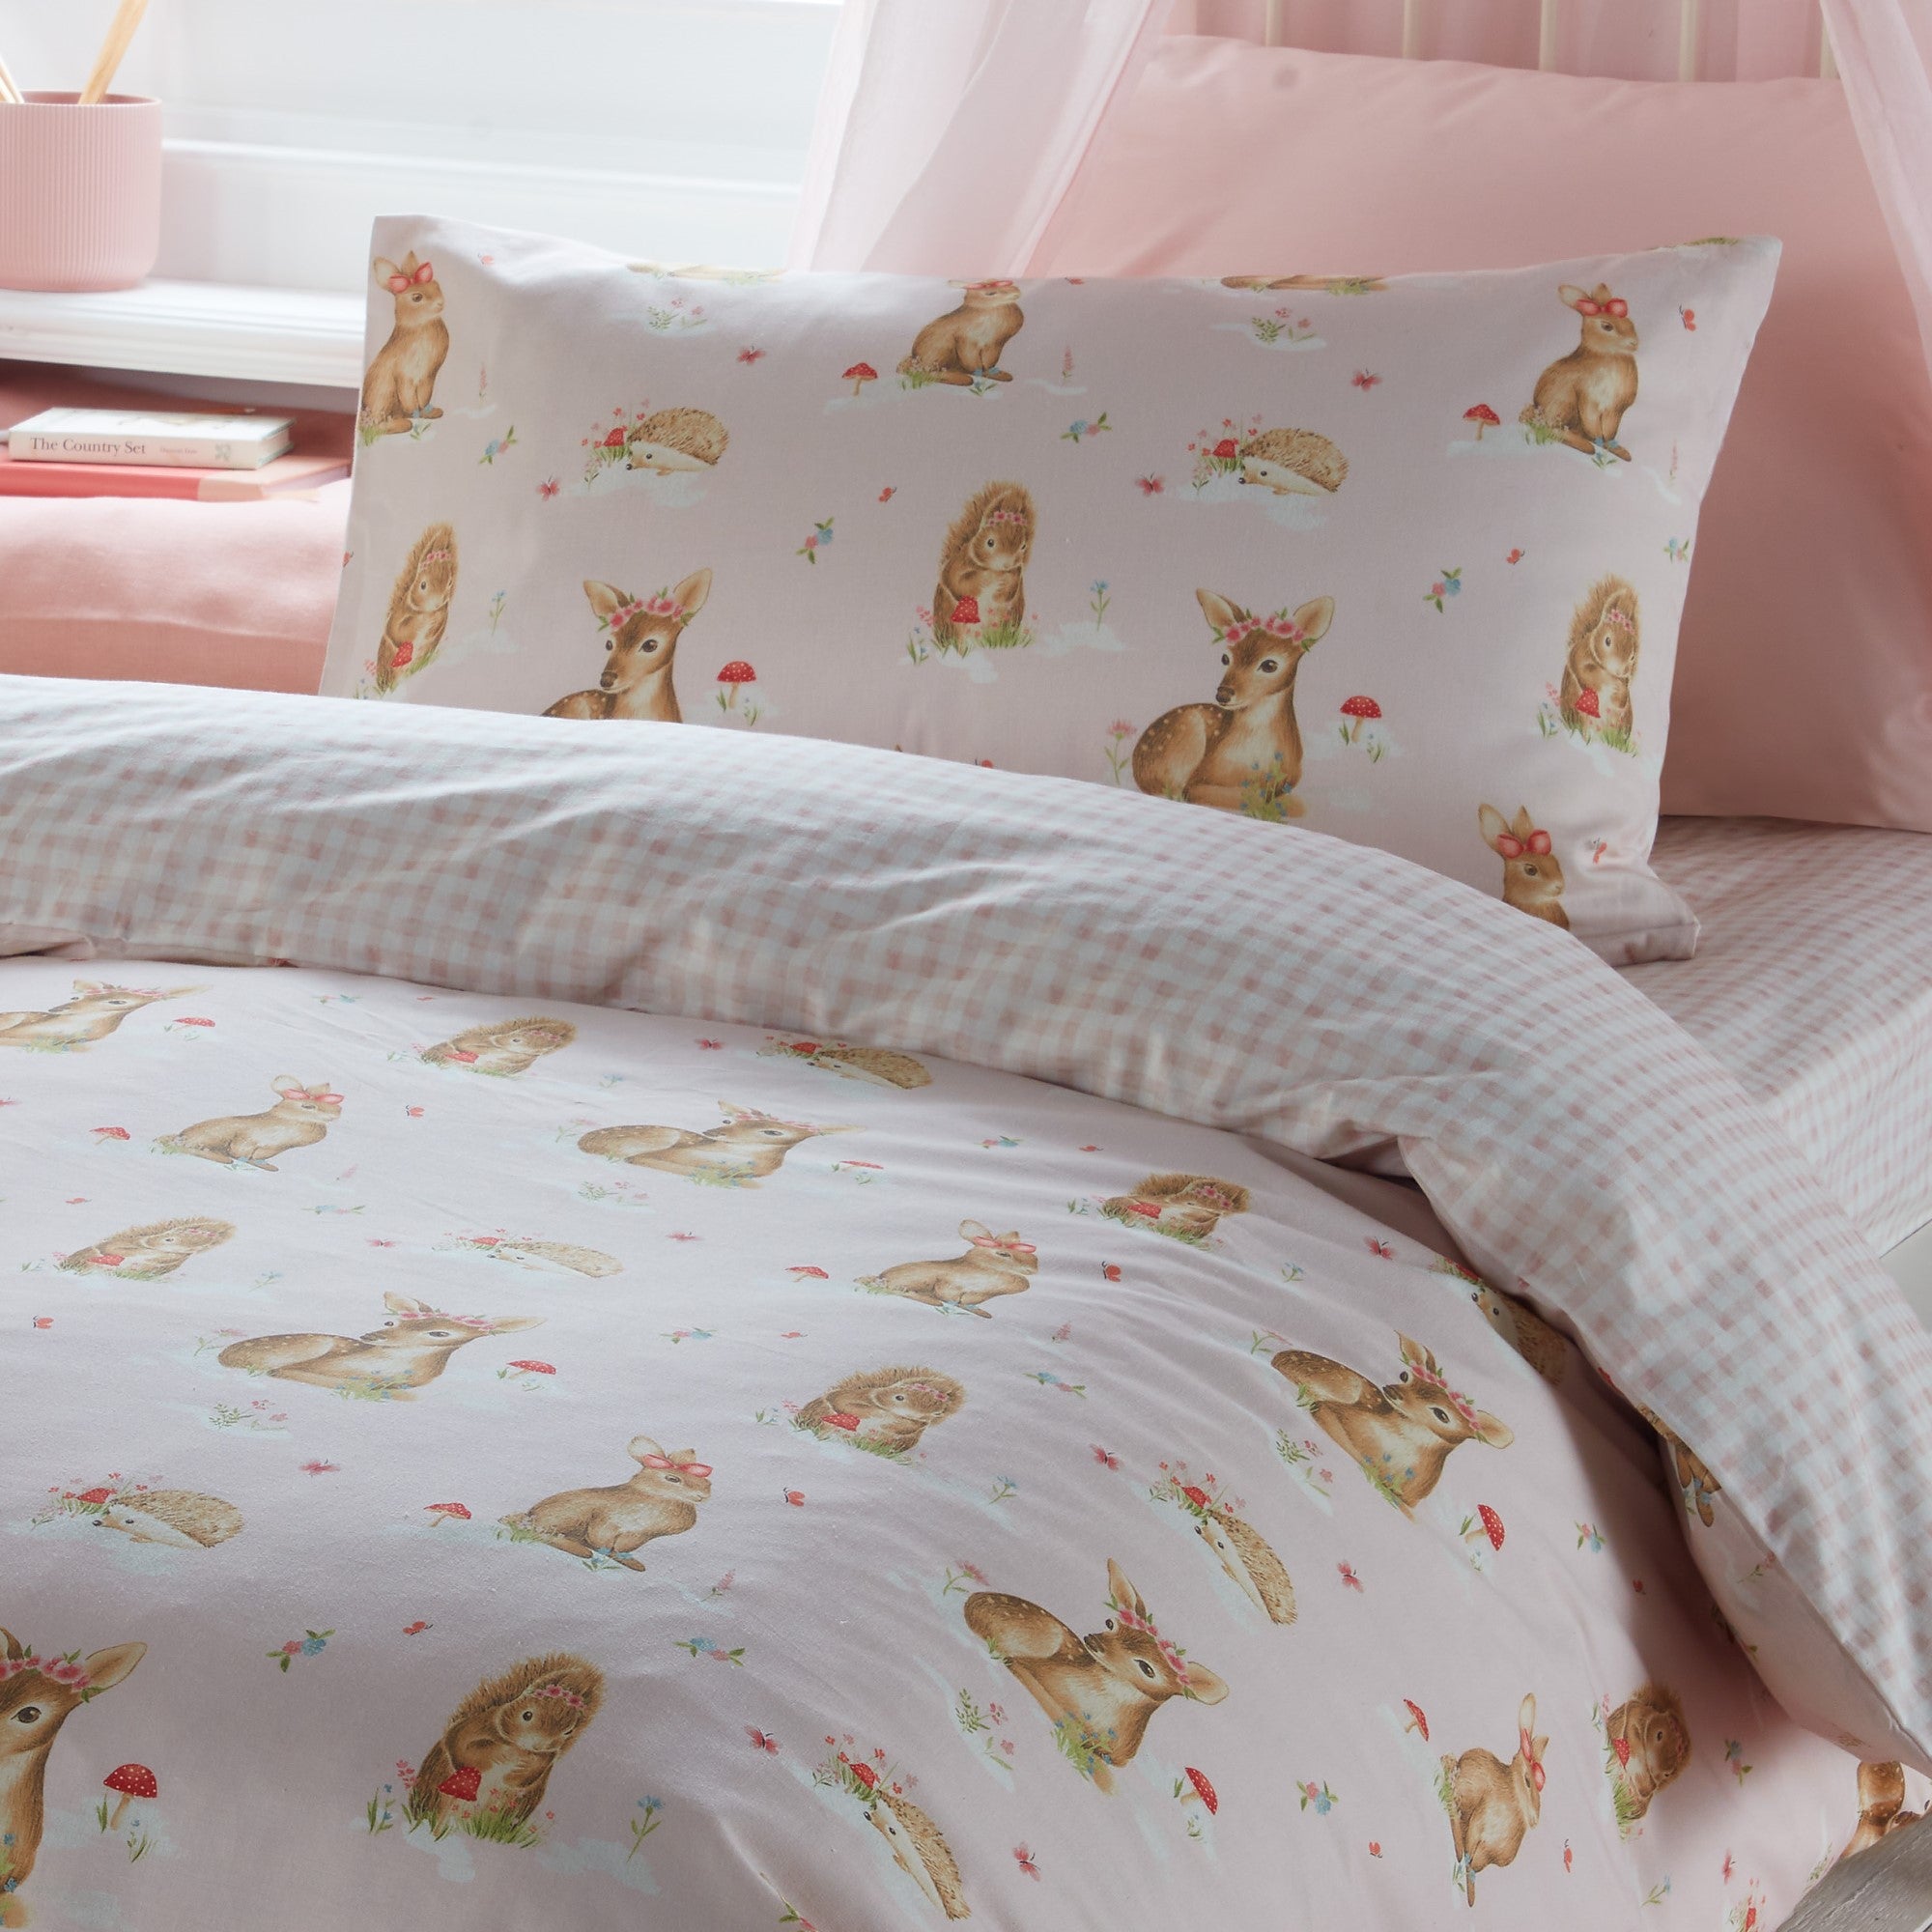 Duvet Cover Set Woodland Friends by Bedlam in Pink